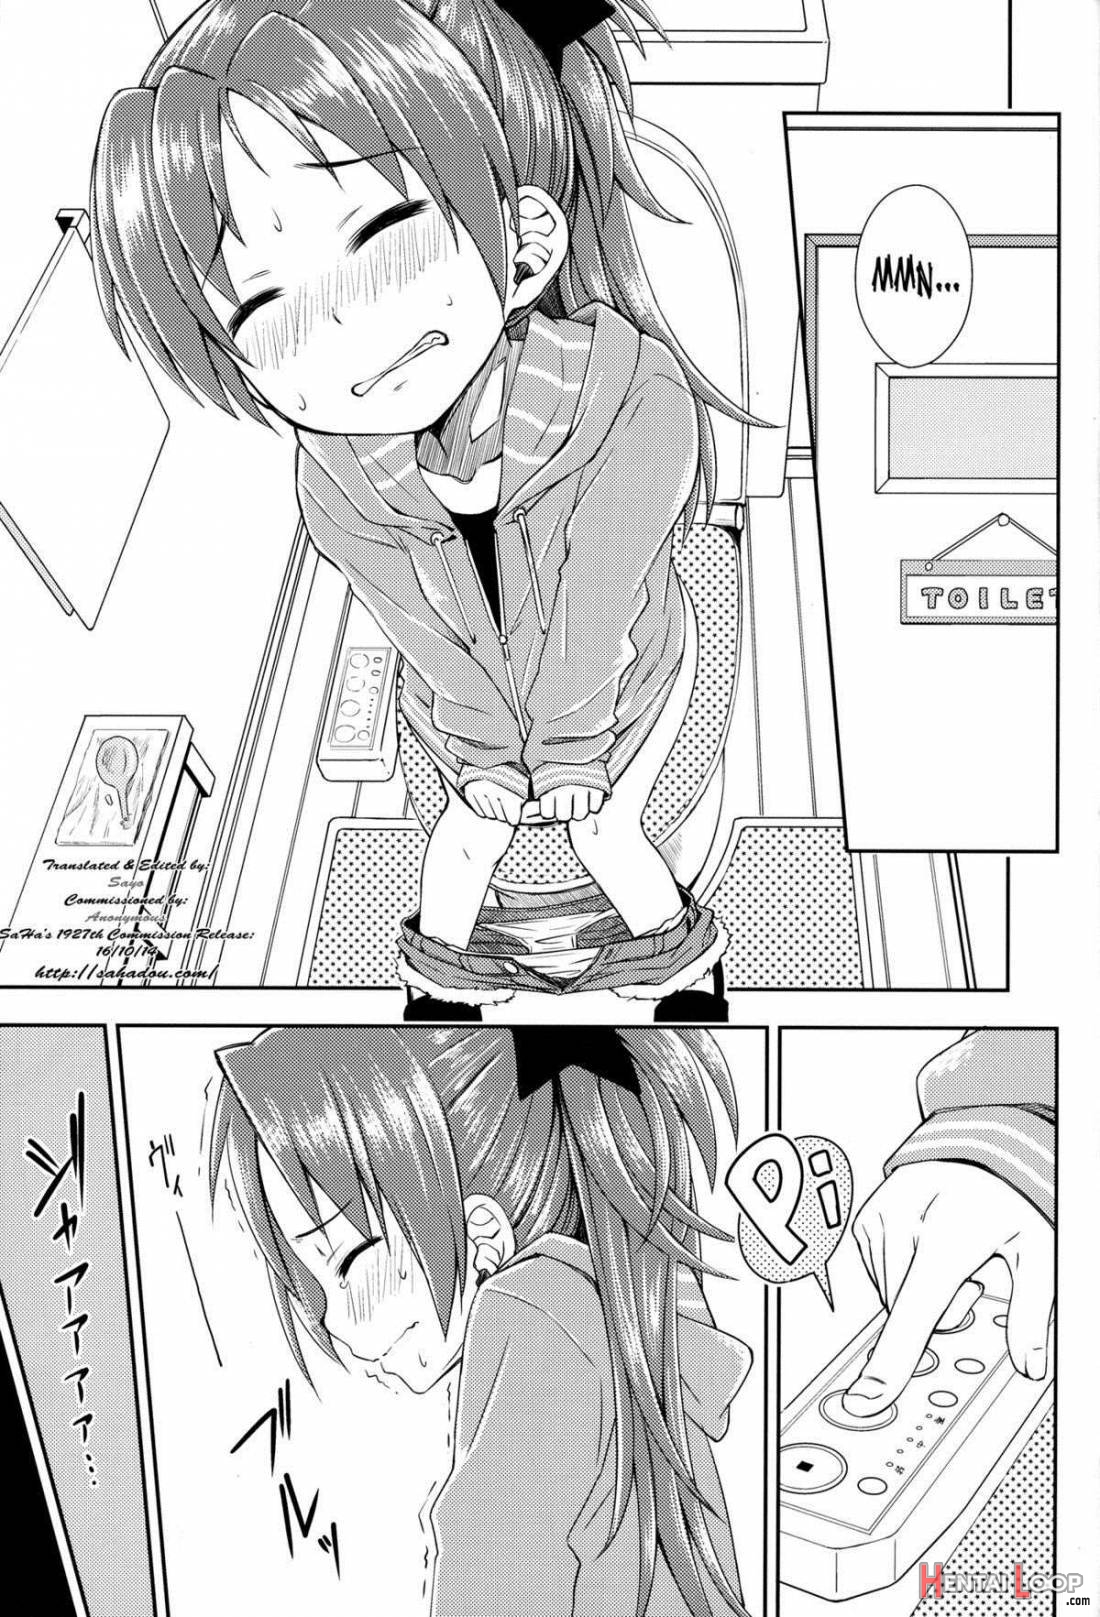 Lovely Girls’ Lily vol.8 page 2